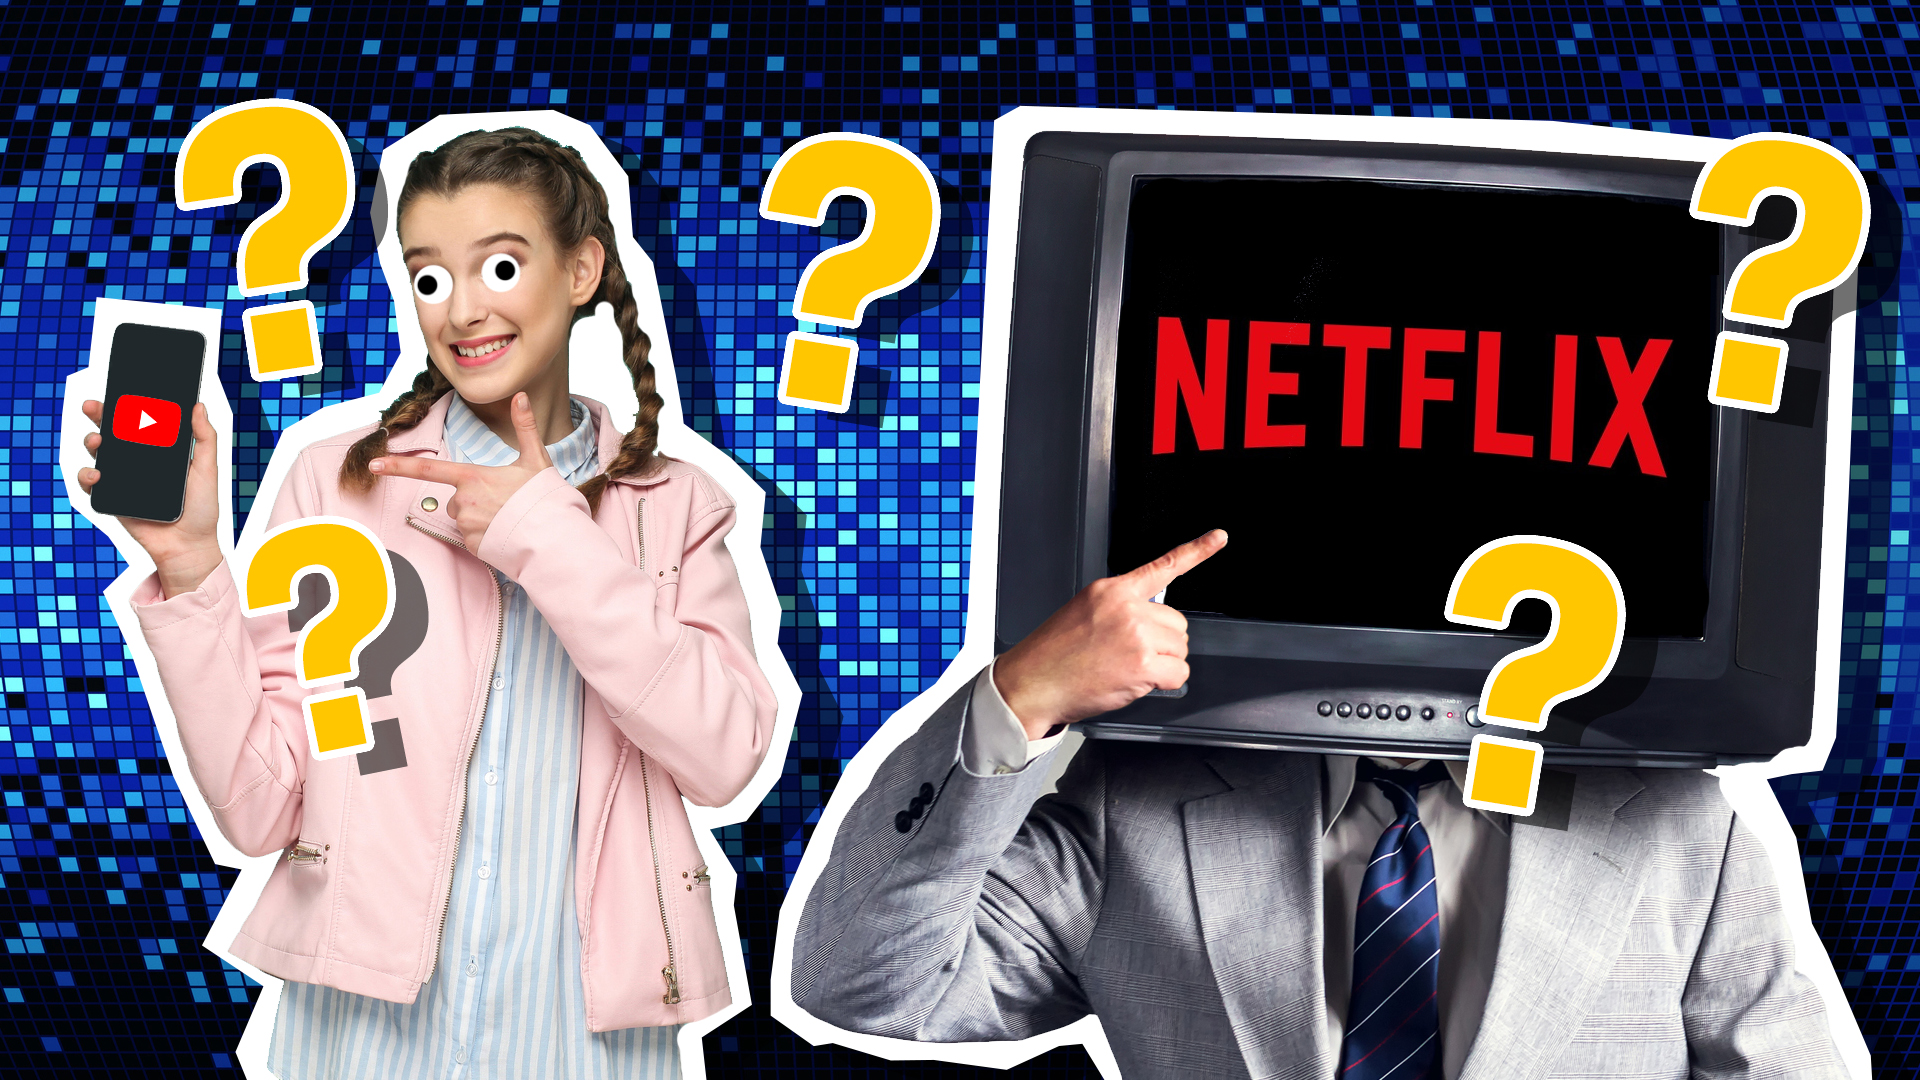 The YouTube or Netflix quiz